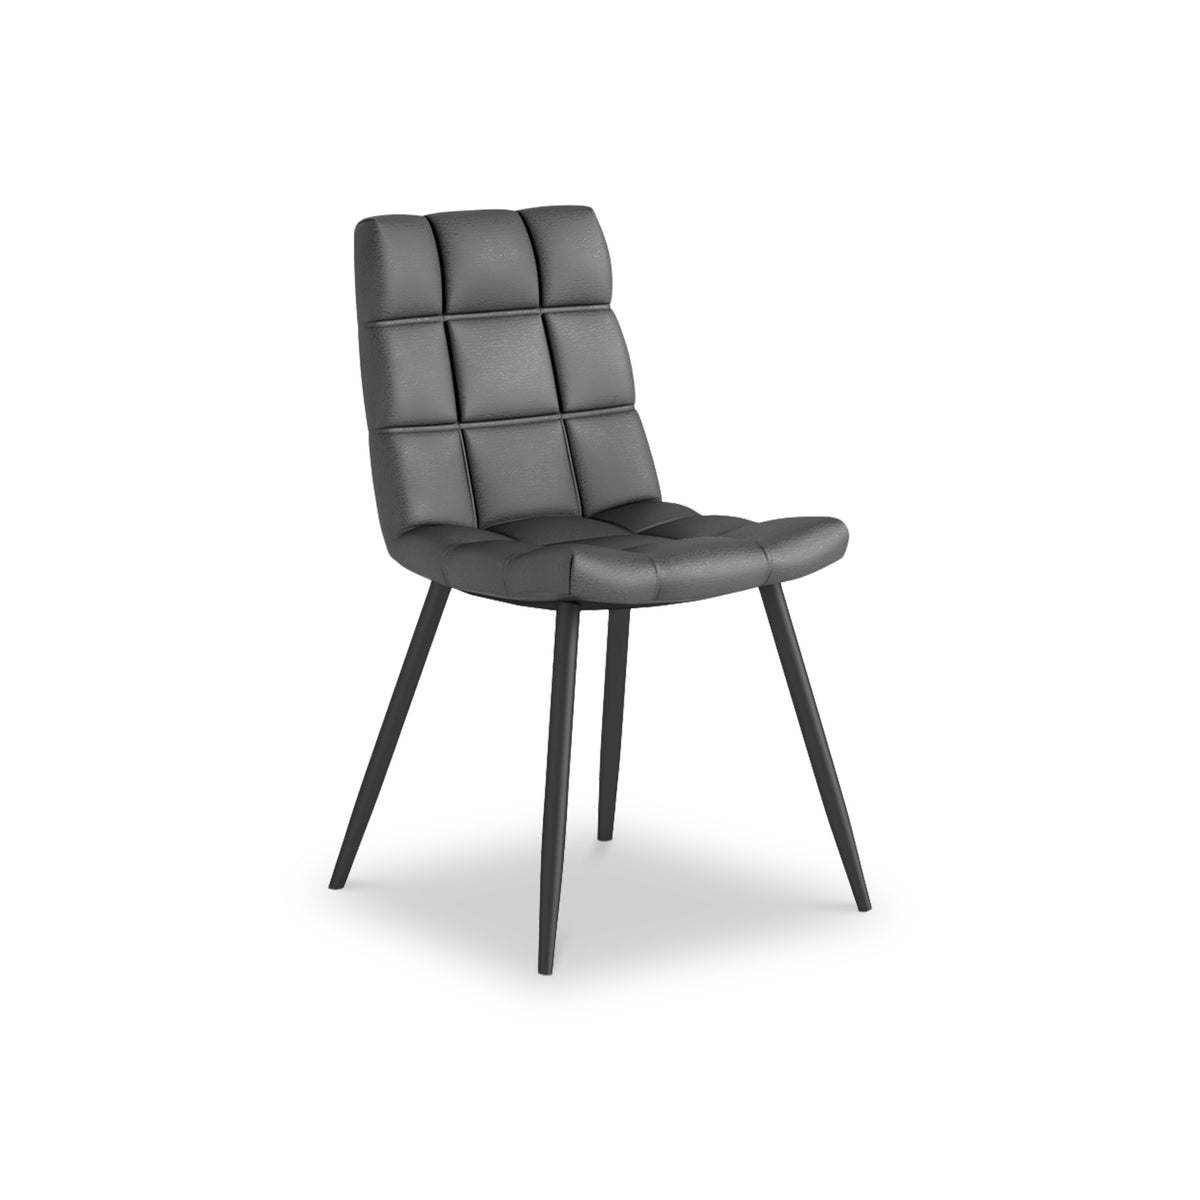 Crawford Dark Grey Faux Leather Dining Chair from Roseland Furniture